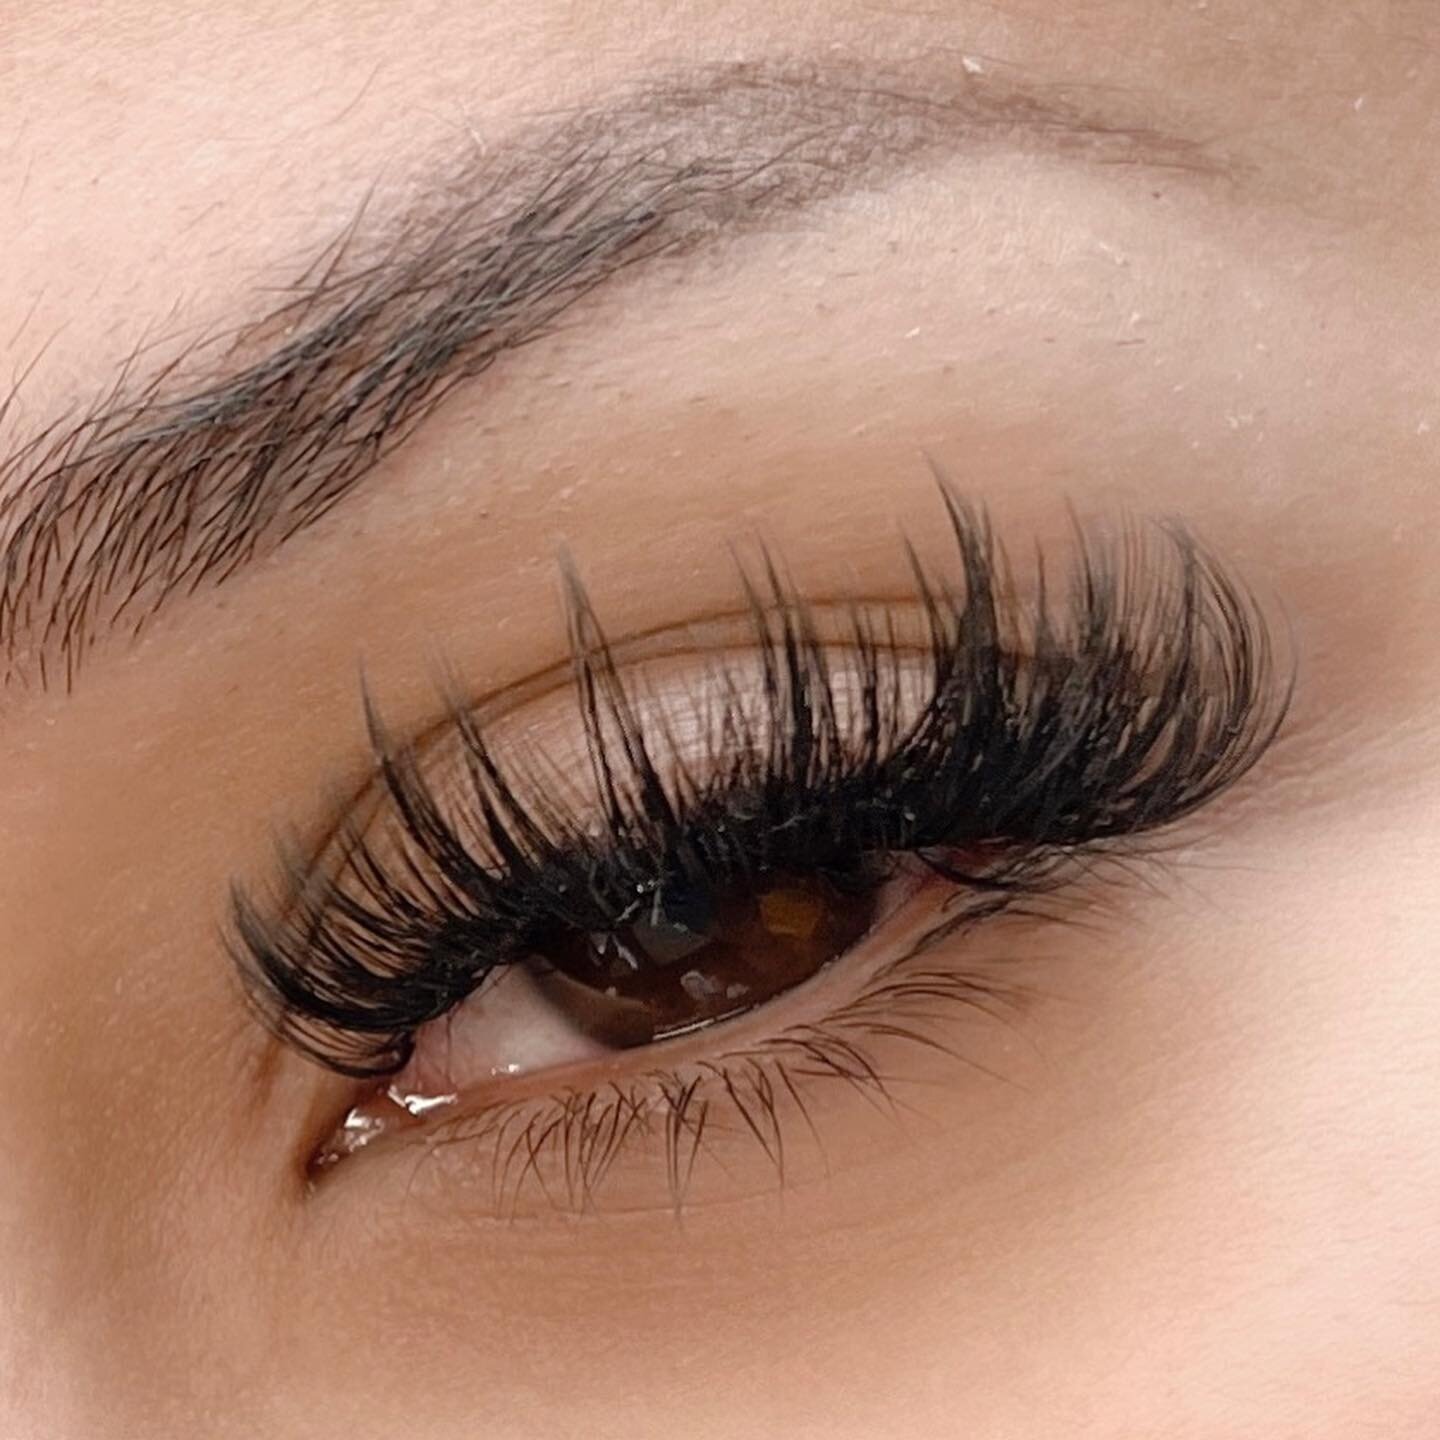 Wisp wisp baby ❤️&zwj;🔥 This is your sign to ditch the strips and wake up ready with strip-look extensions! 
Limited July appointments still available, now booking for August: soluxbeauty.com. 
-

#dfwlashes #dallaslashes #dallaslashtech
#dallaslash